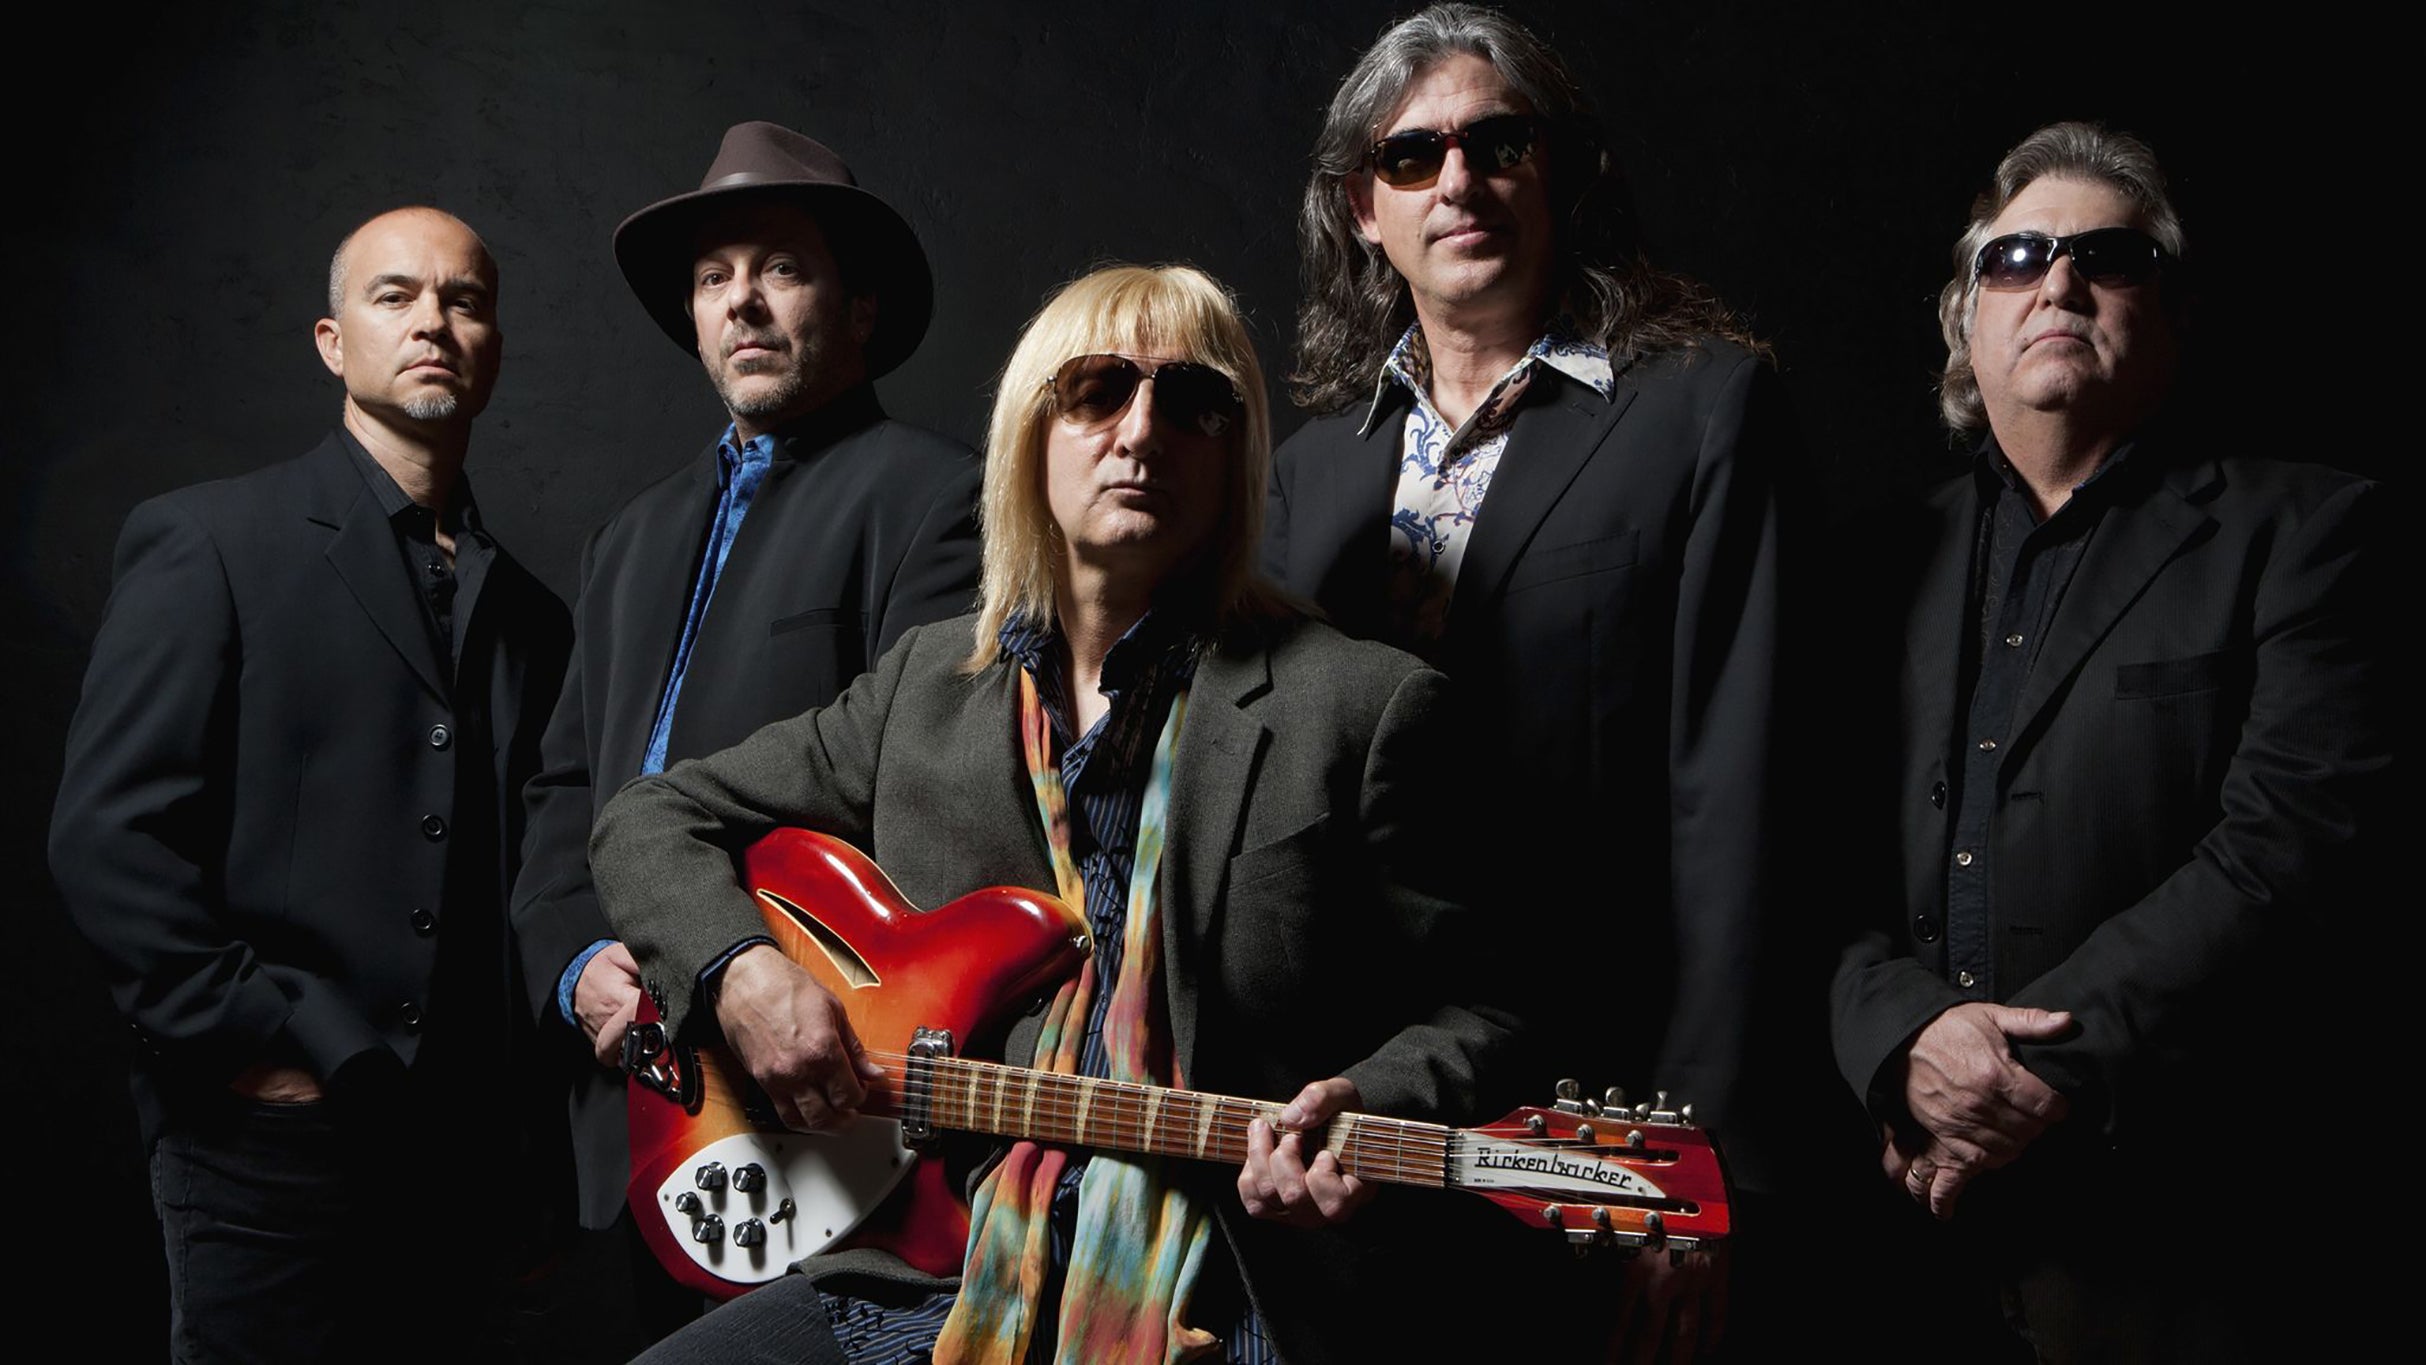 The Pettybreakers - A Tribute to Tom Petty in Stateline promo photo for Partner presale offer code